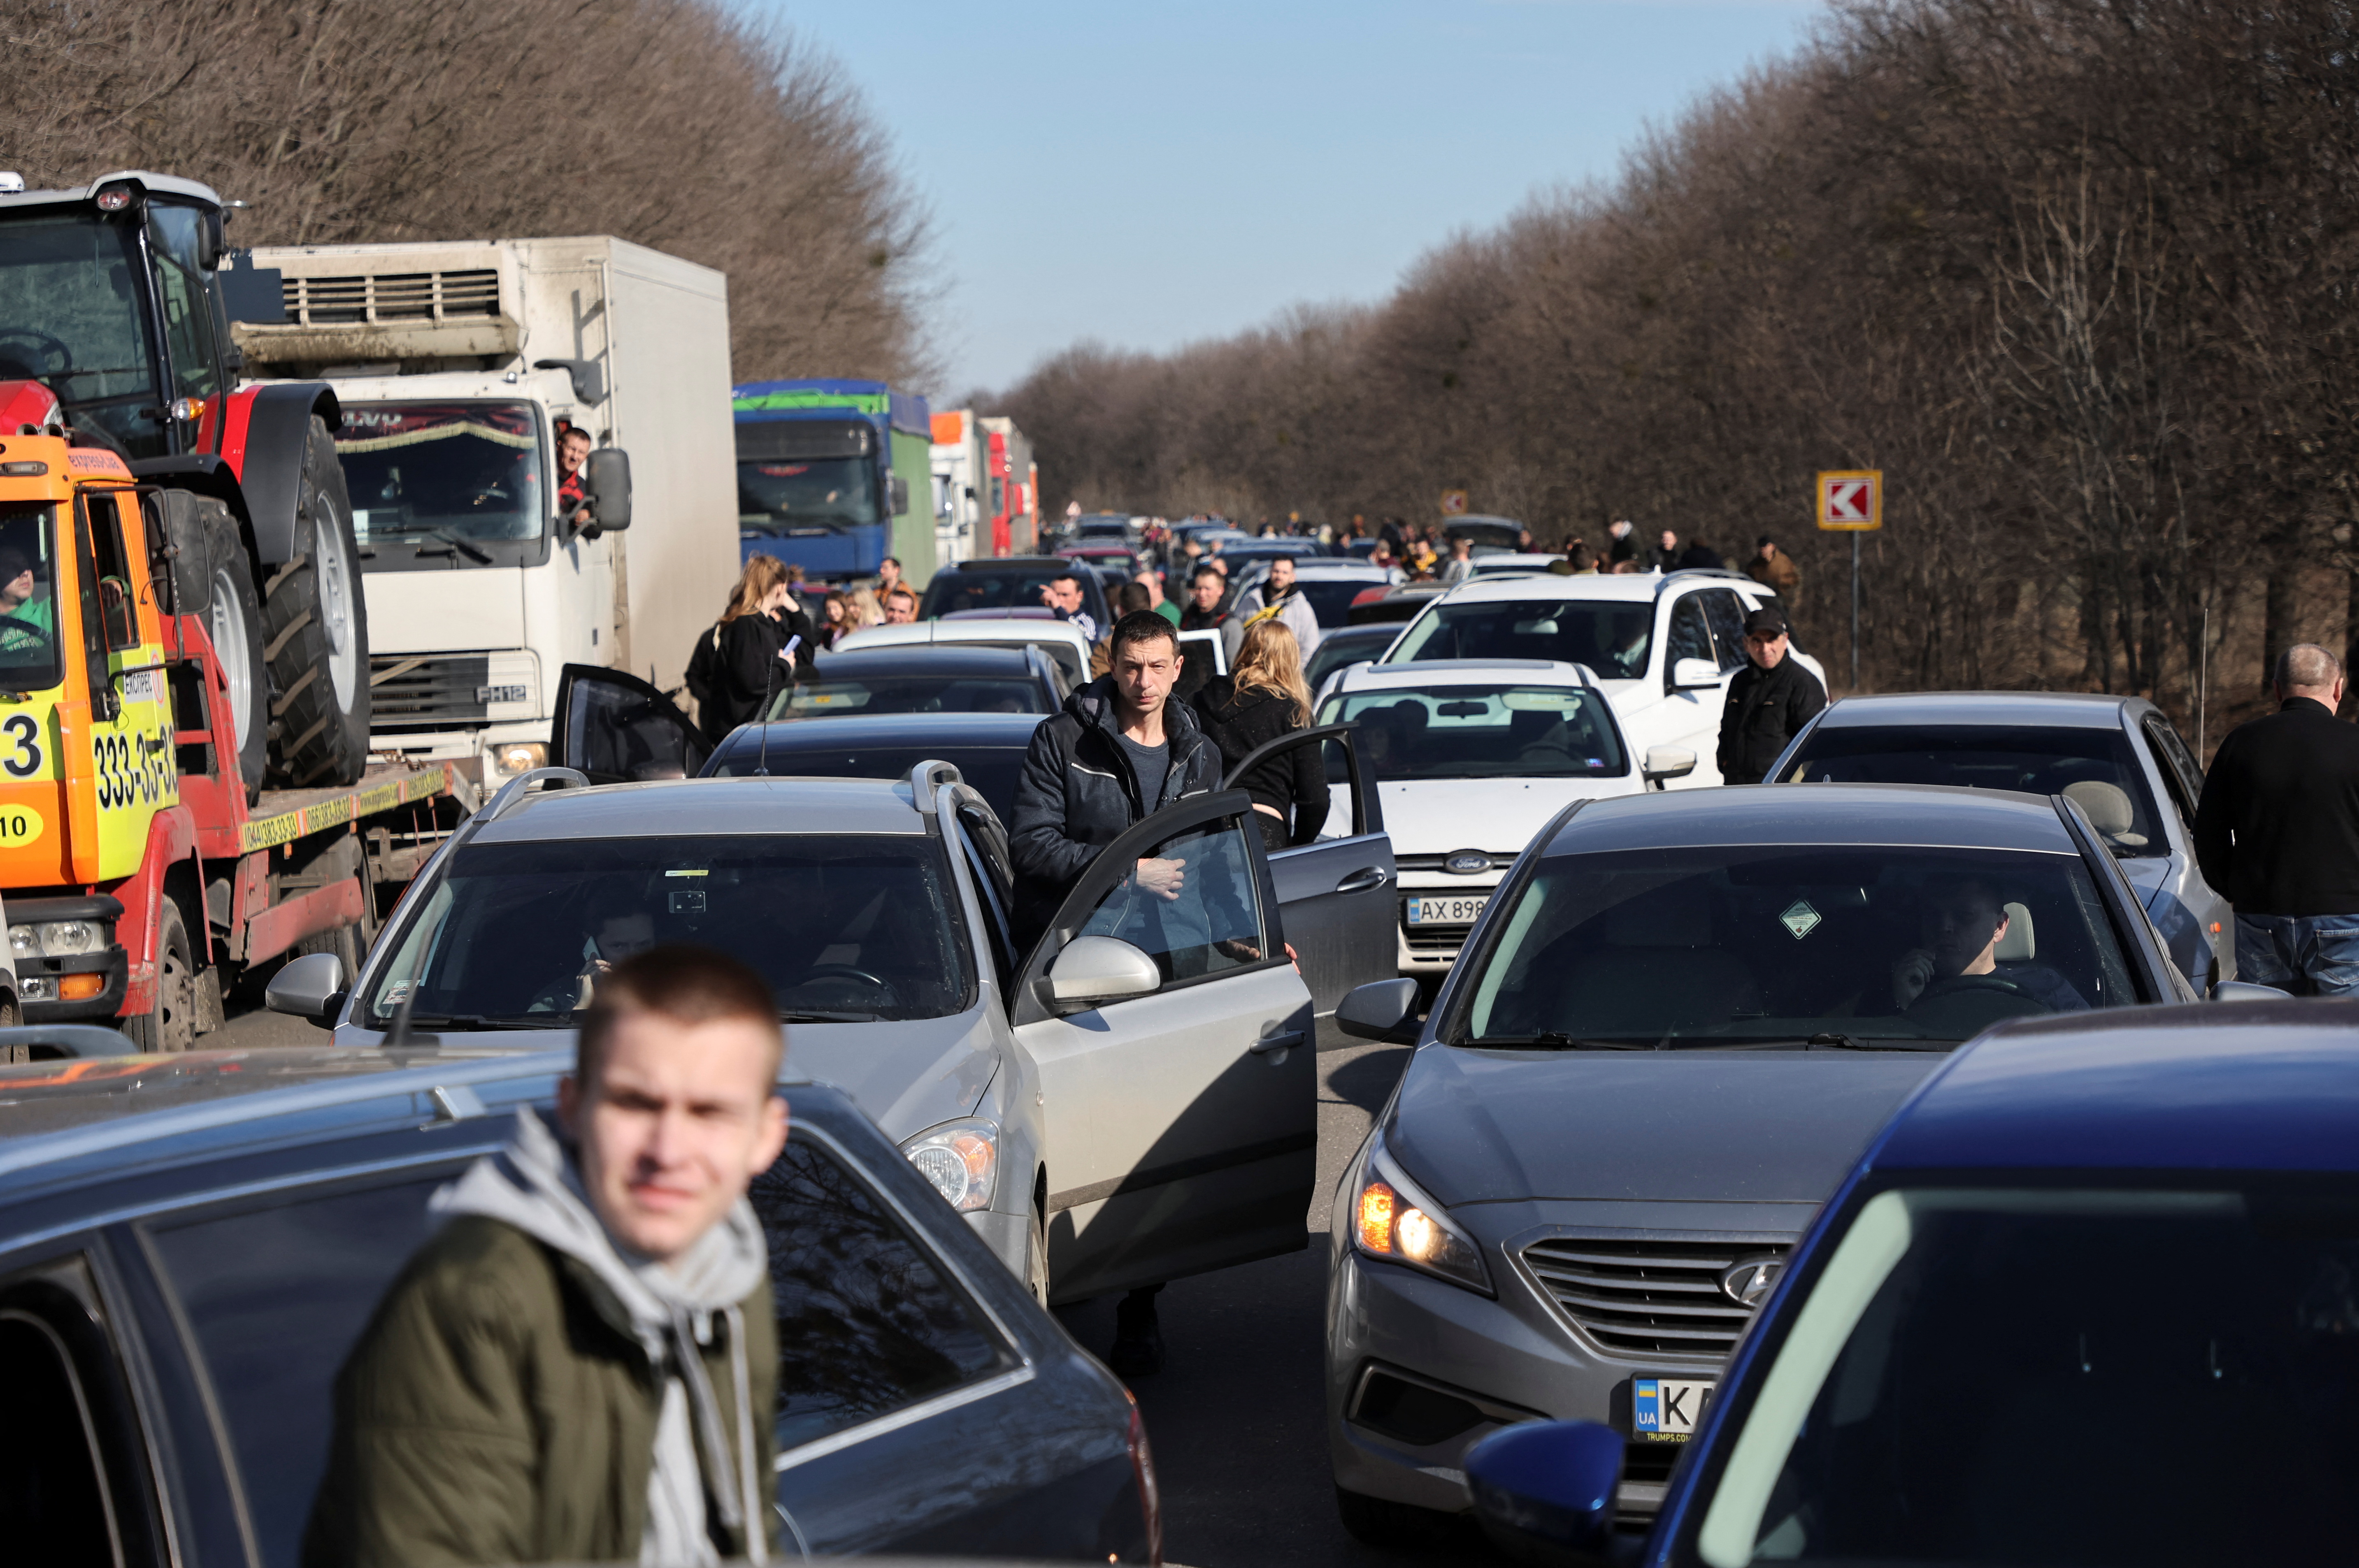 People wait in a traffic jam as they leave the city of Kharkiv, after Russian President Vladimir Putin authorized a military operation in eastern Ukraine, in Kharkiv region, Ukraine February 24, 2022. REUTERS /Antonio Tronic